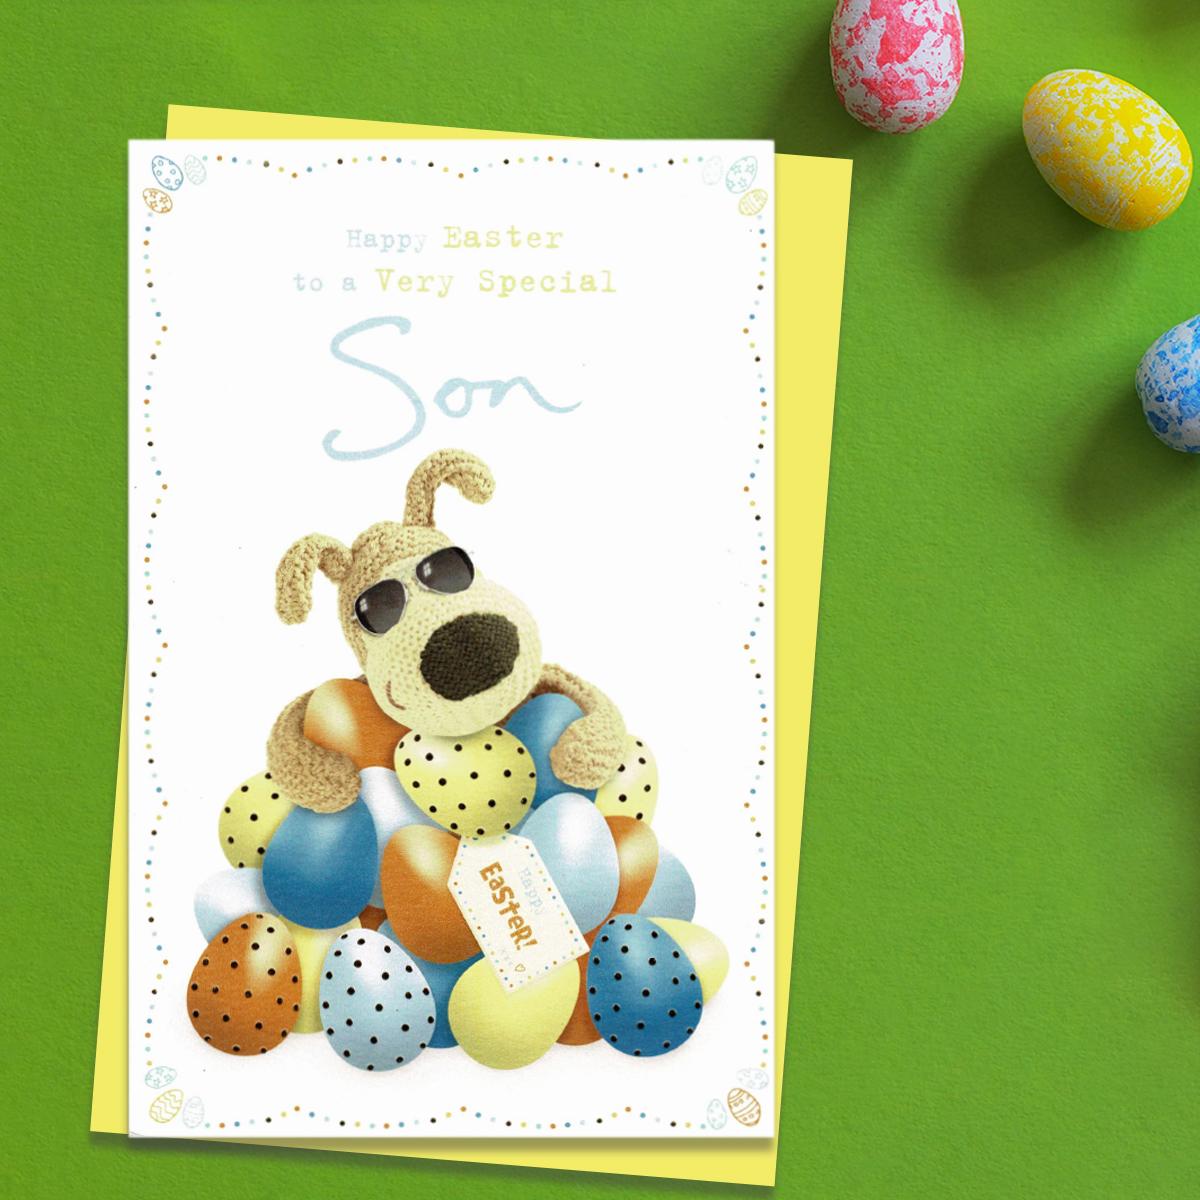 ' Happy Easter To A Very Special Son' Boofle Bear card Featuring Boofle With a Huge Pile Of Easter Eggs! Complete With gold Foil Detail And Yellow Envelope